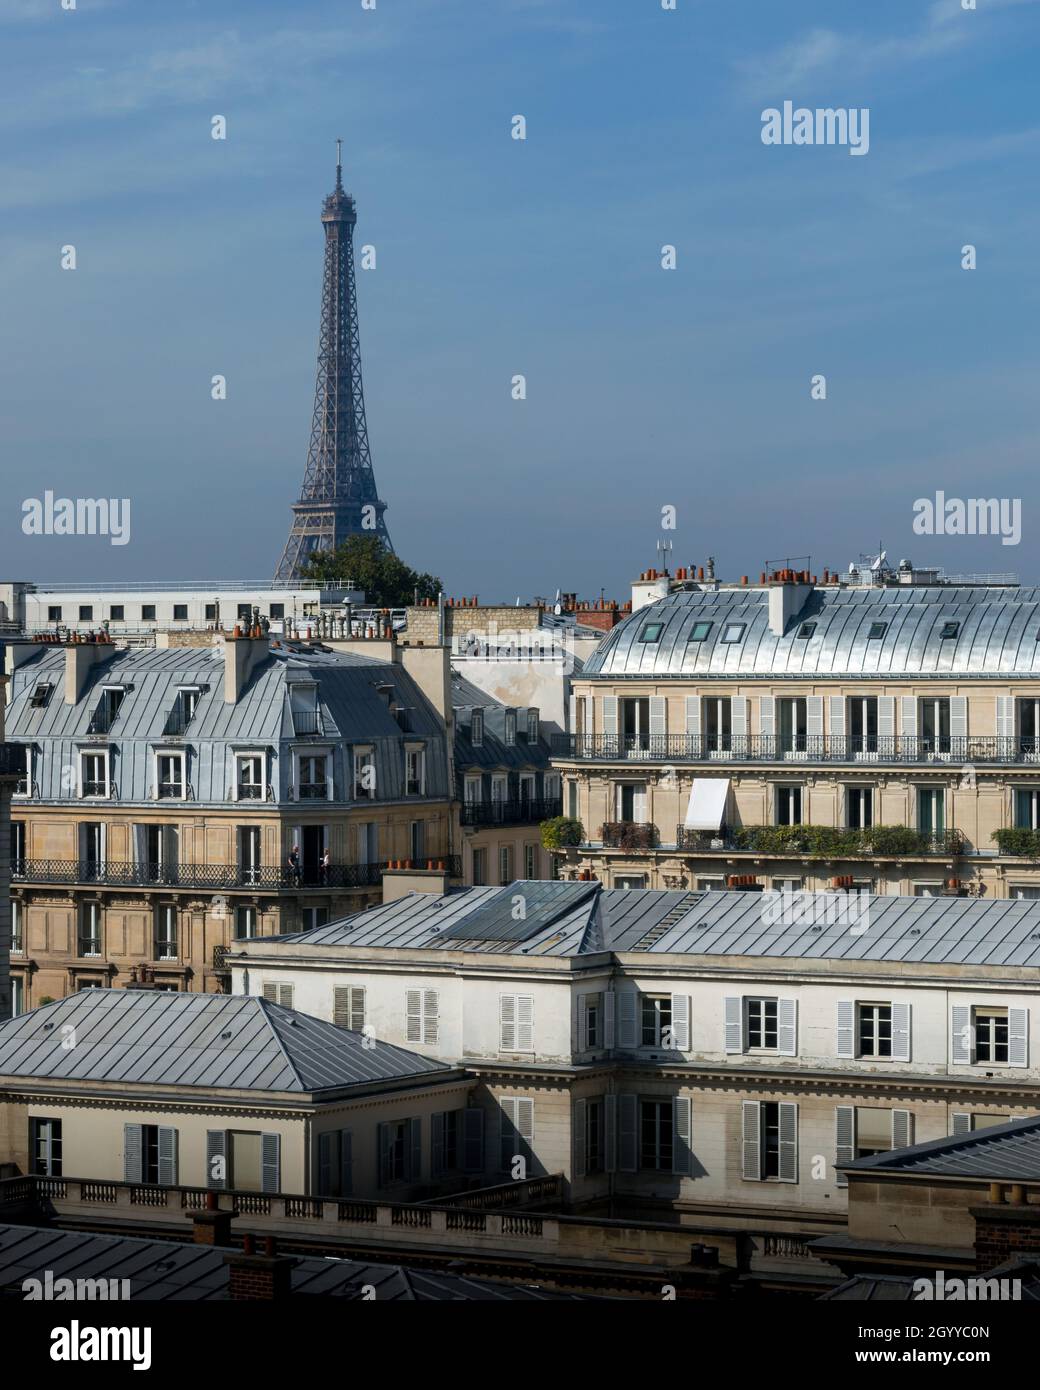 The Eiffel Tower shot from far away, Paris France Stock Photo